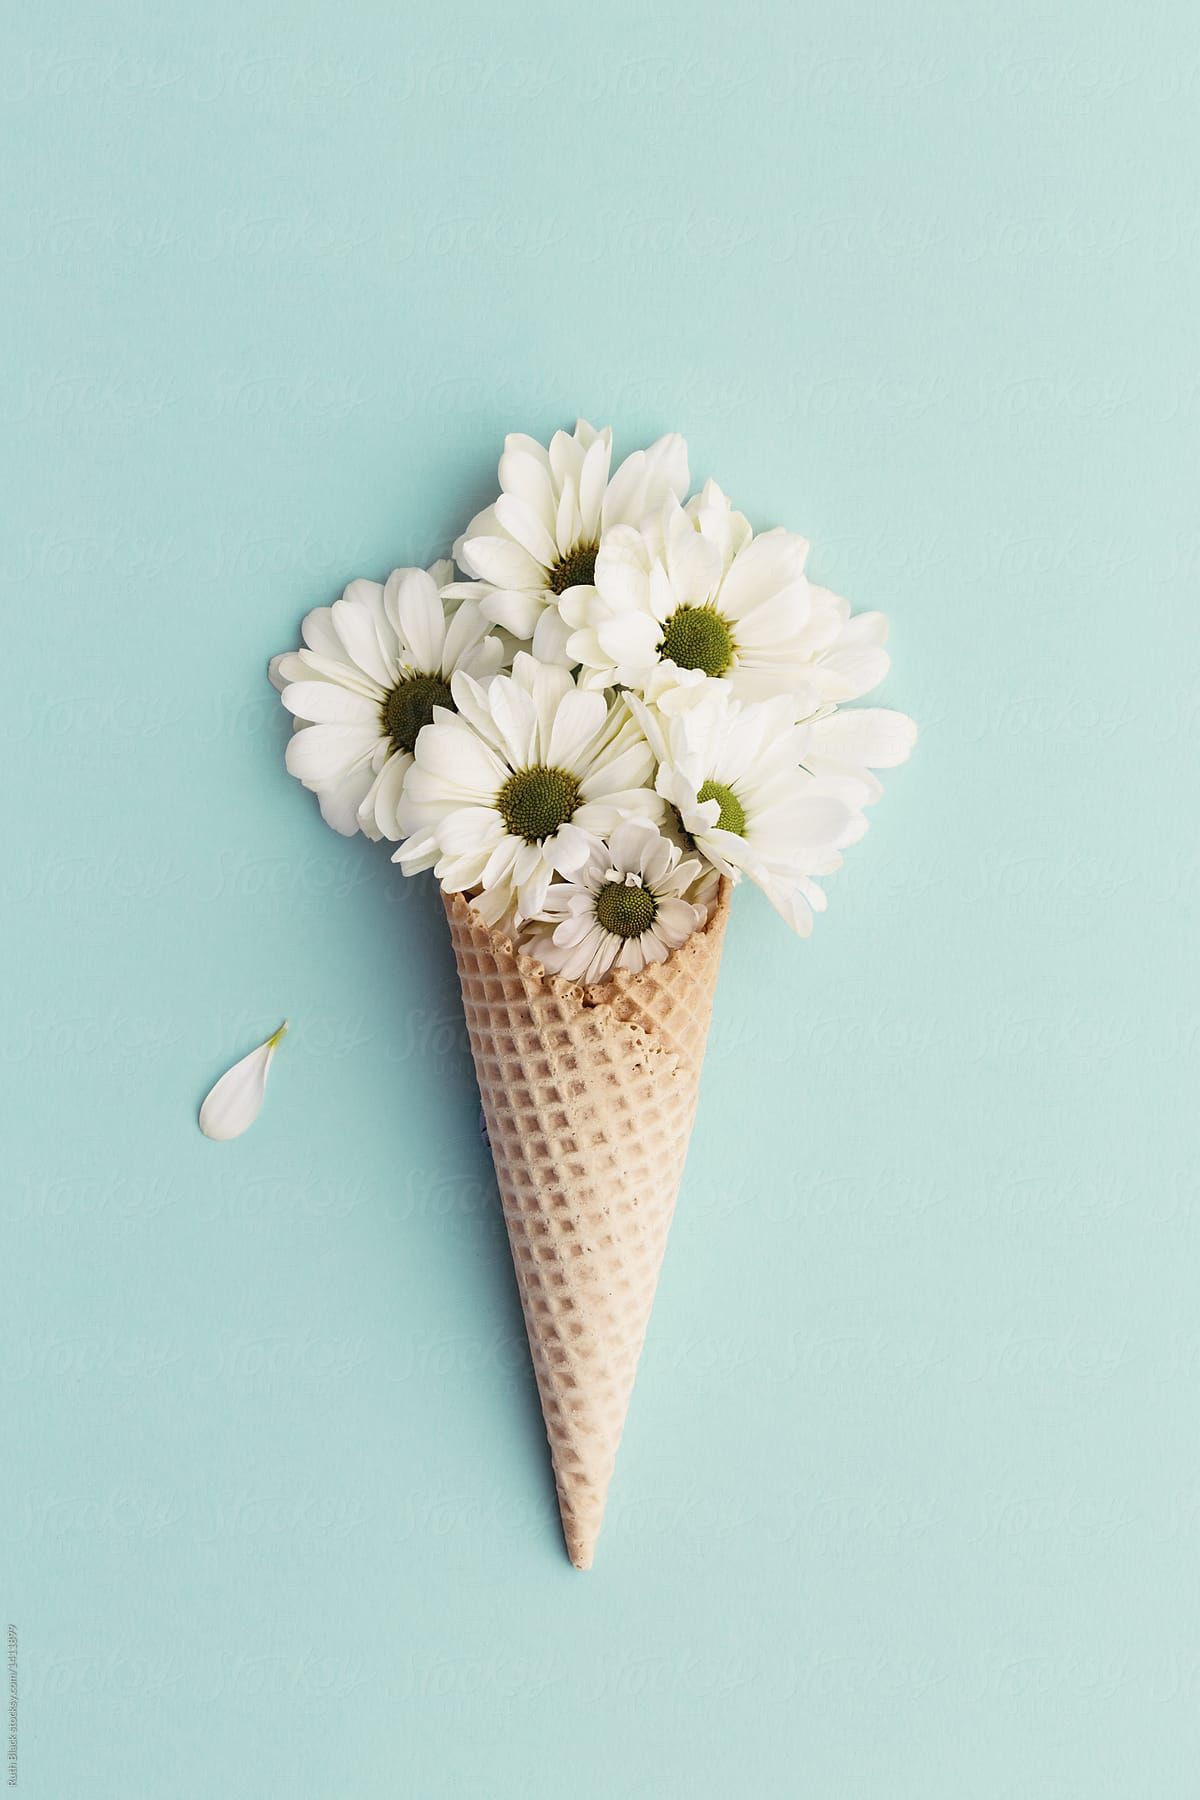 Daisies In An Ice Cream Cor This High Resolution Stock